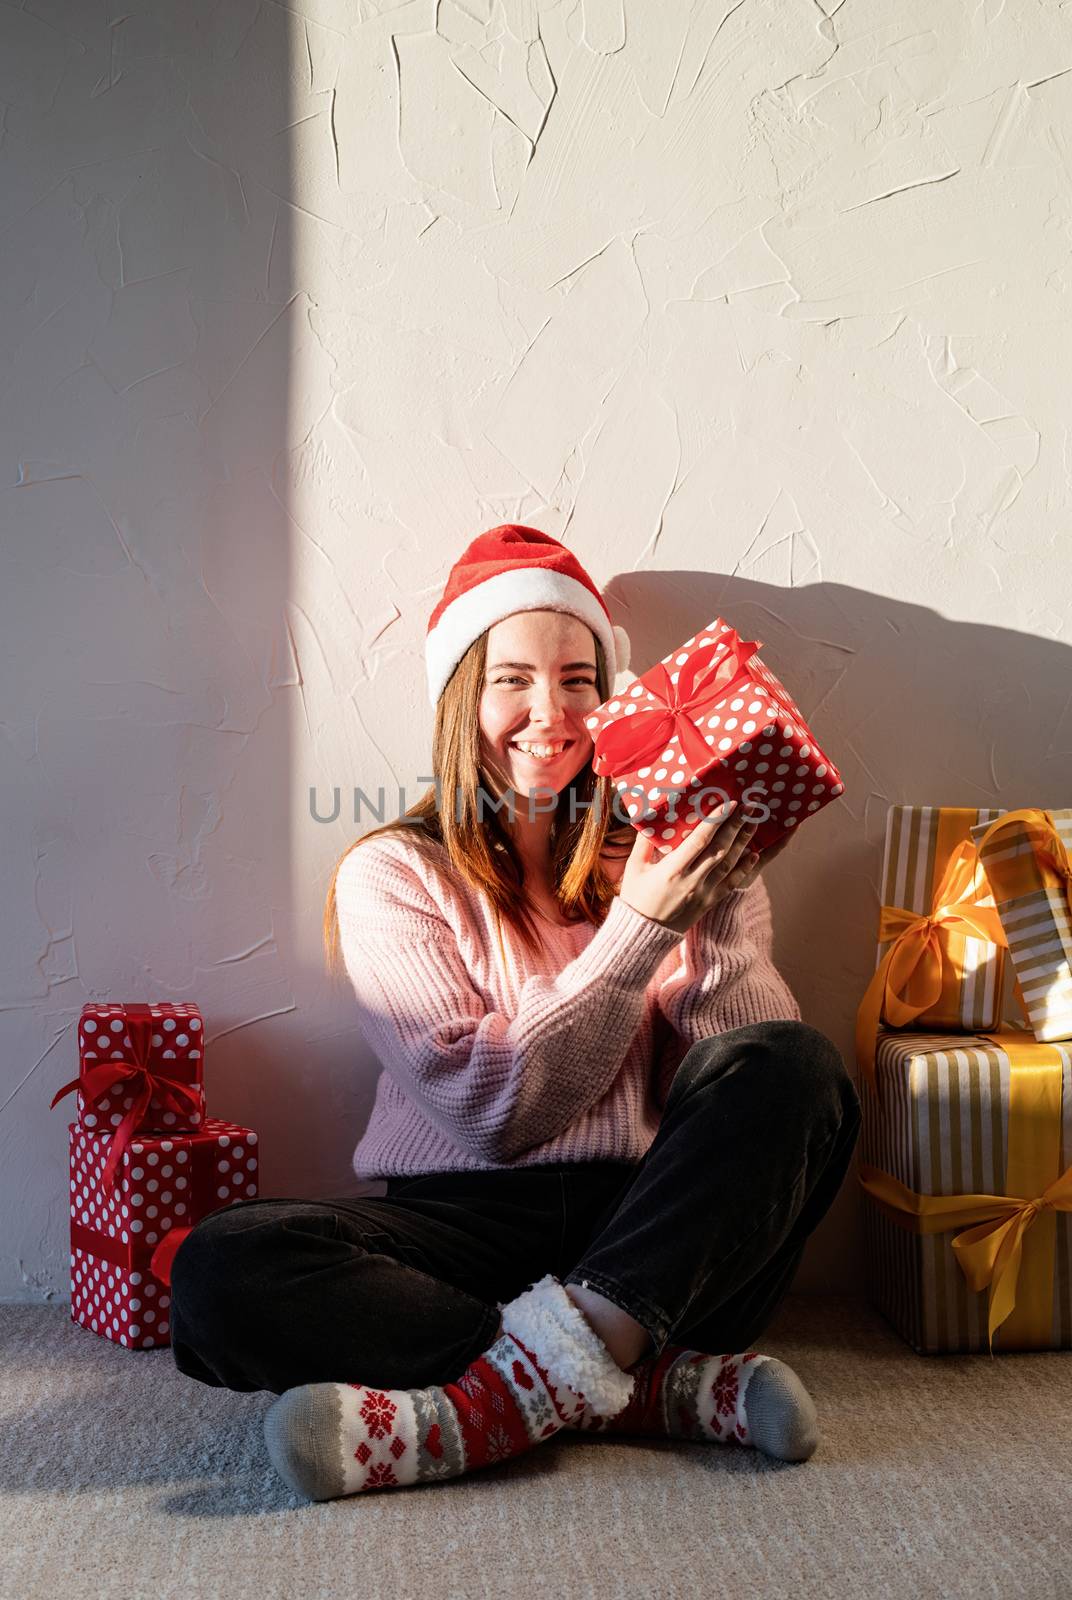 Christmas and New Year. Young woman in santa hat surrounded by presents